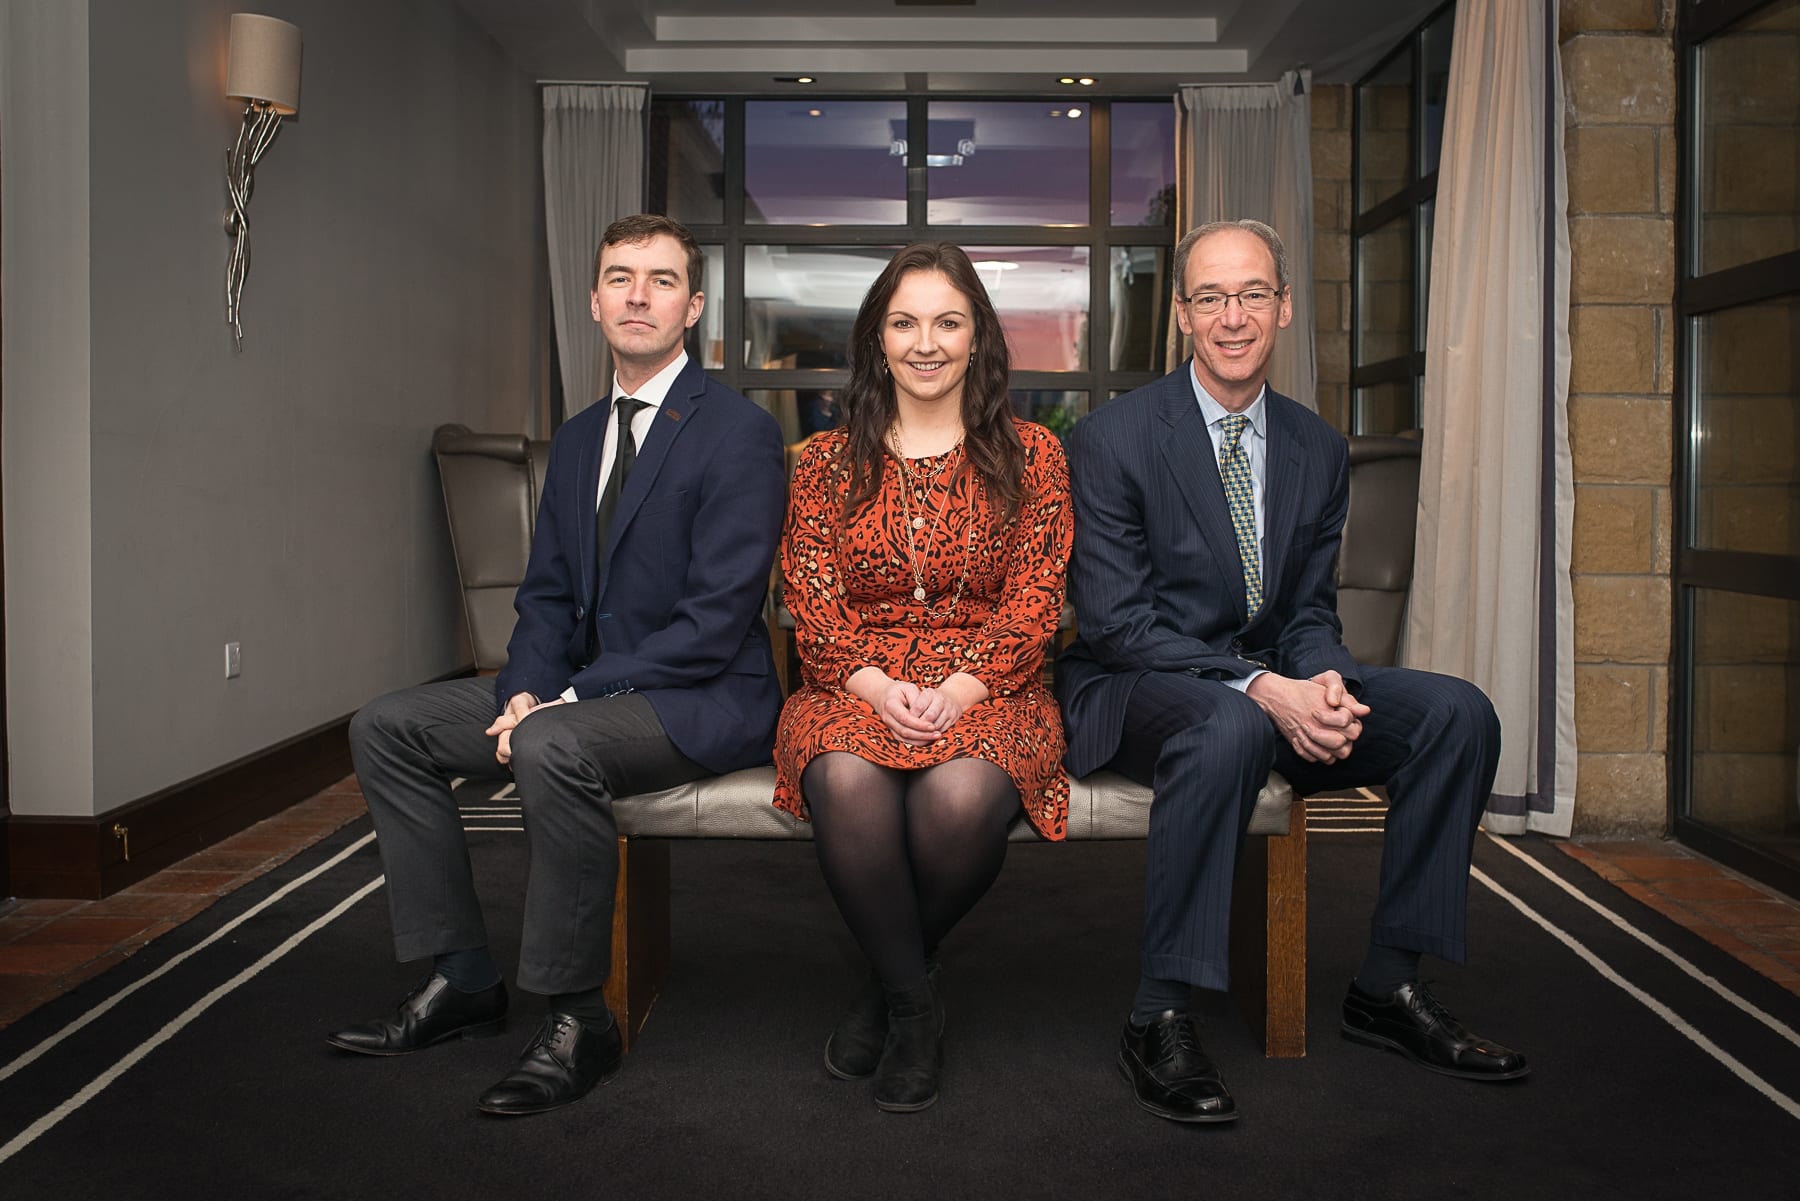 Economic Breakfast Briefing; European and Local Economic Outlook In association with the Limerick Post which took place in the Castletroy Park Hotel on Monday 11th Feb 2019:  From left to right:  Prof. Stephen Kinsella - Associate Professor, Kemmy Business School, University of Limerick / Speaker,  Dr. Catriona Cahill - Limerick Chamber Economist/ Speaker,  Mr. Carl R. Tannenbaum - Executive Vice President, Chief Economist, Northern Trust / Speaker, Image by Morning Star Photography